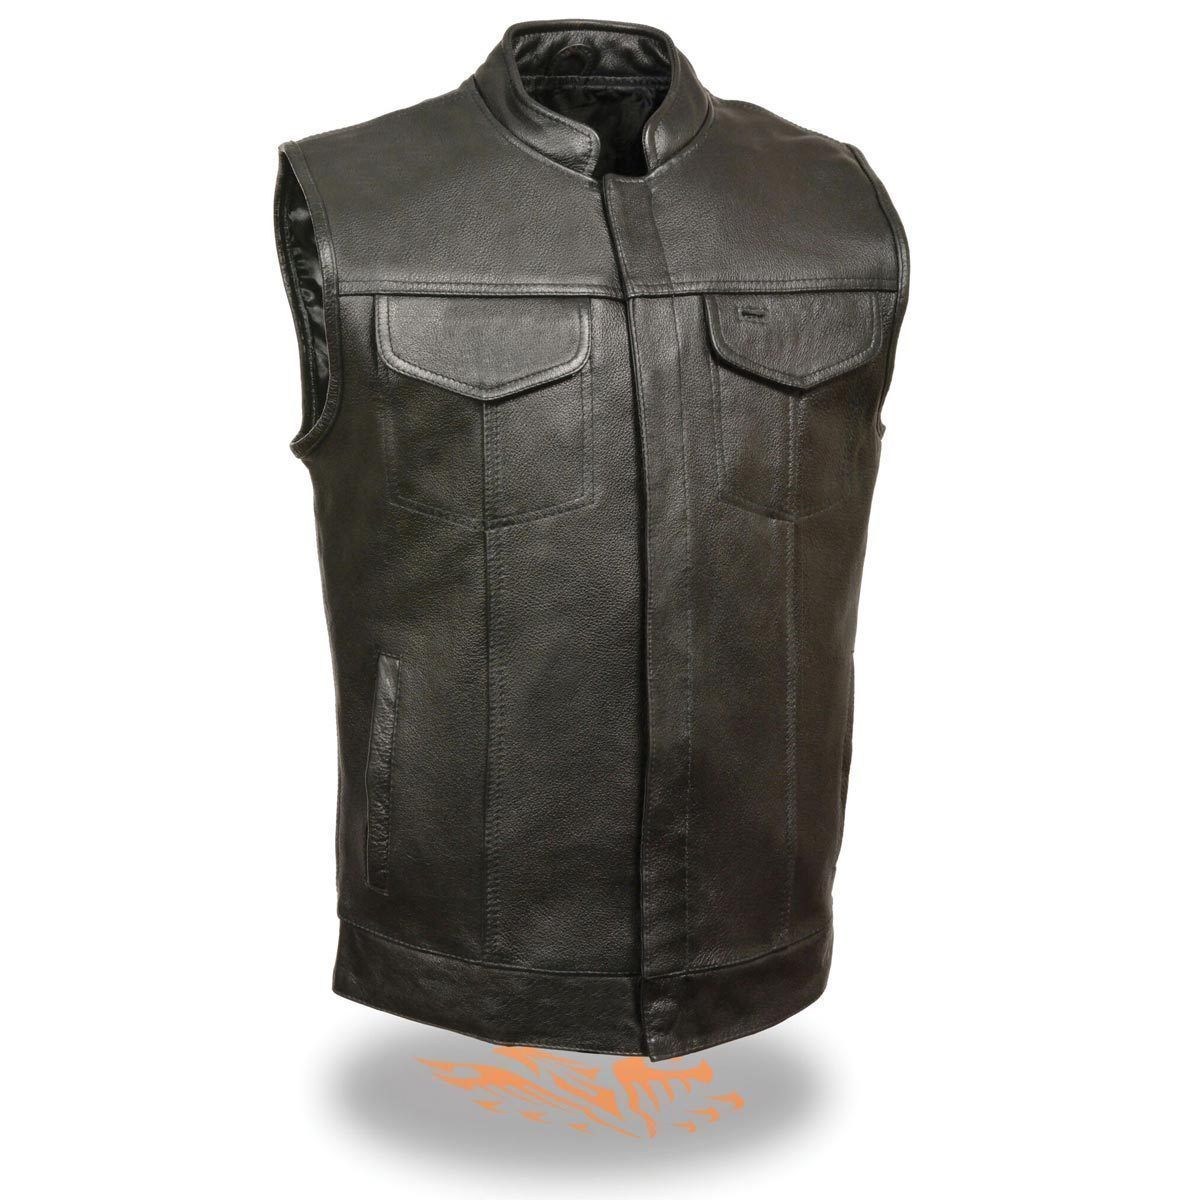 Milwaukee Leather SH2036 Men's Black 'Club' Open Neck Leather Vest with Dual Gun Pockets - Milwaukee Leather Mens Leather Vests